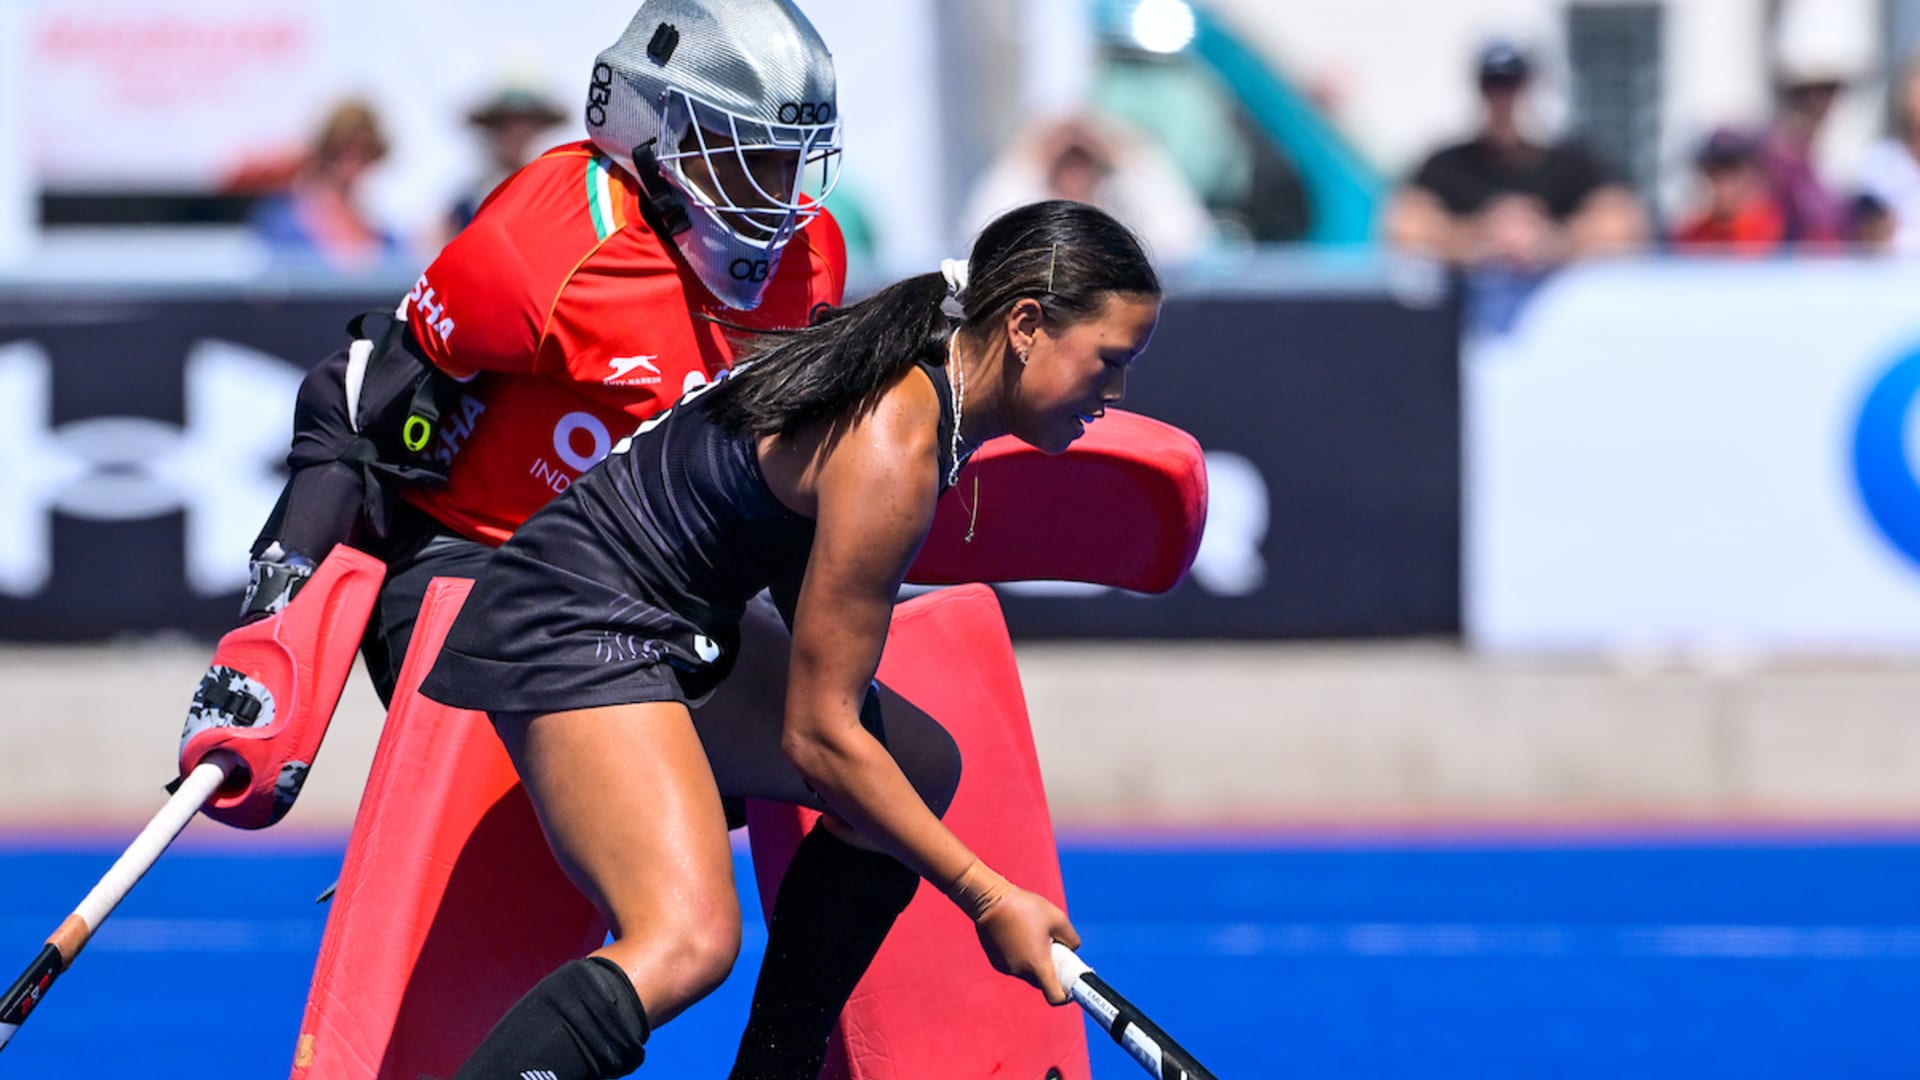 FIH Hockey Women's Junior World Cup Chile 2023: Pool D Preview